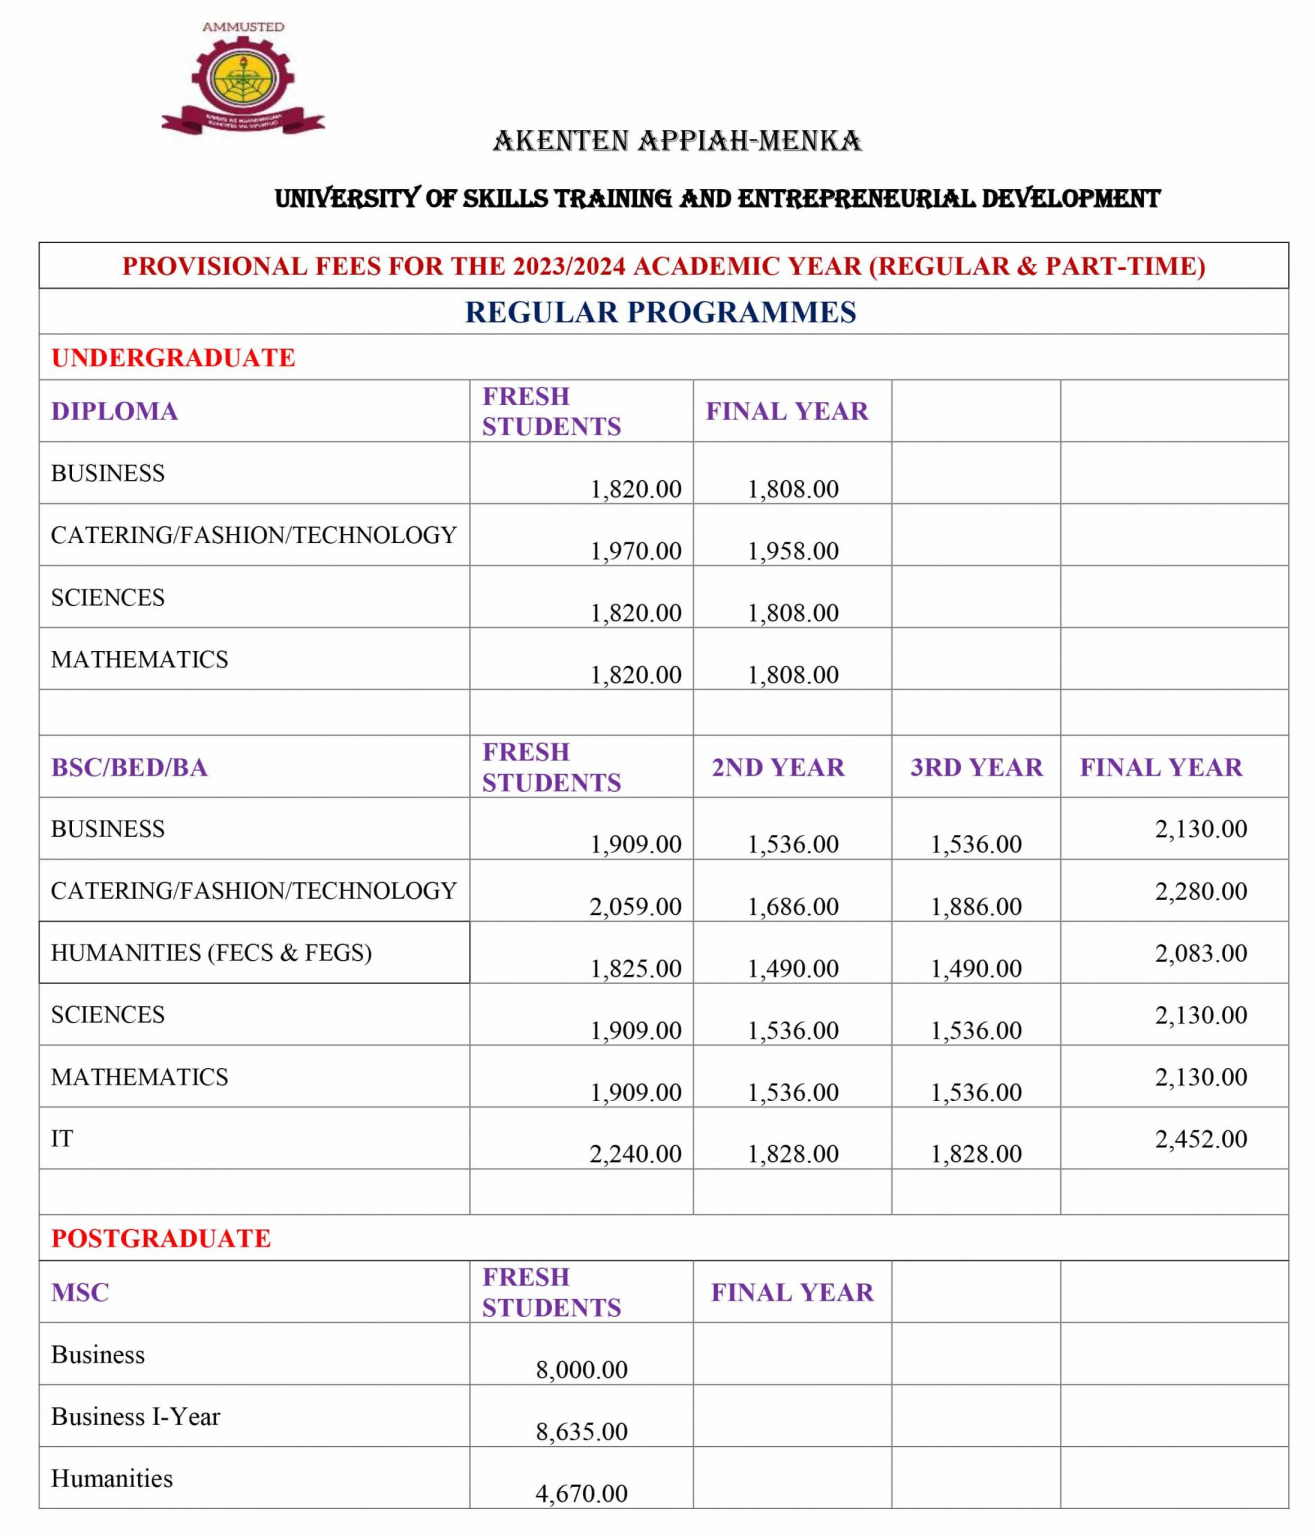 AAMUSTED Fees Schedule For 2023/2024